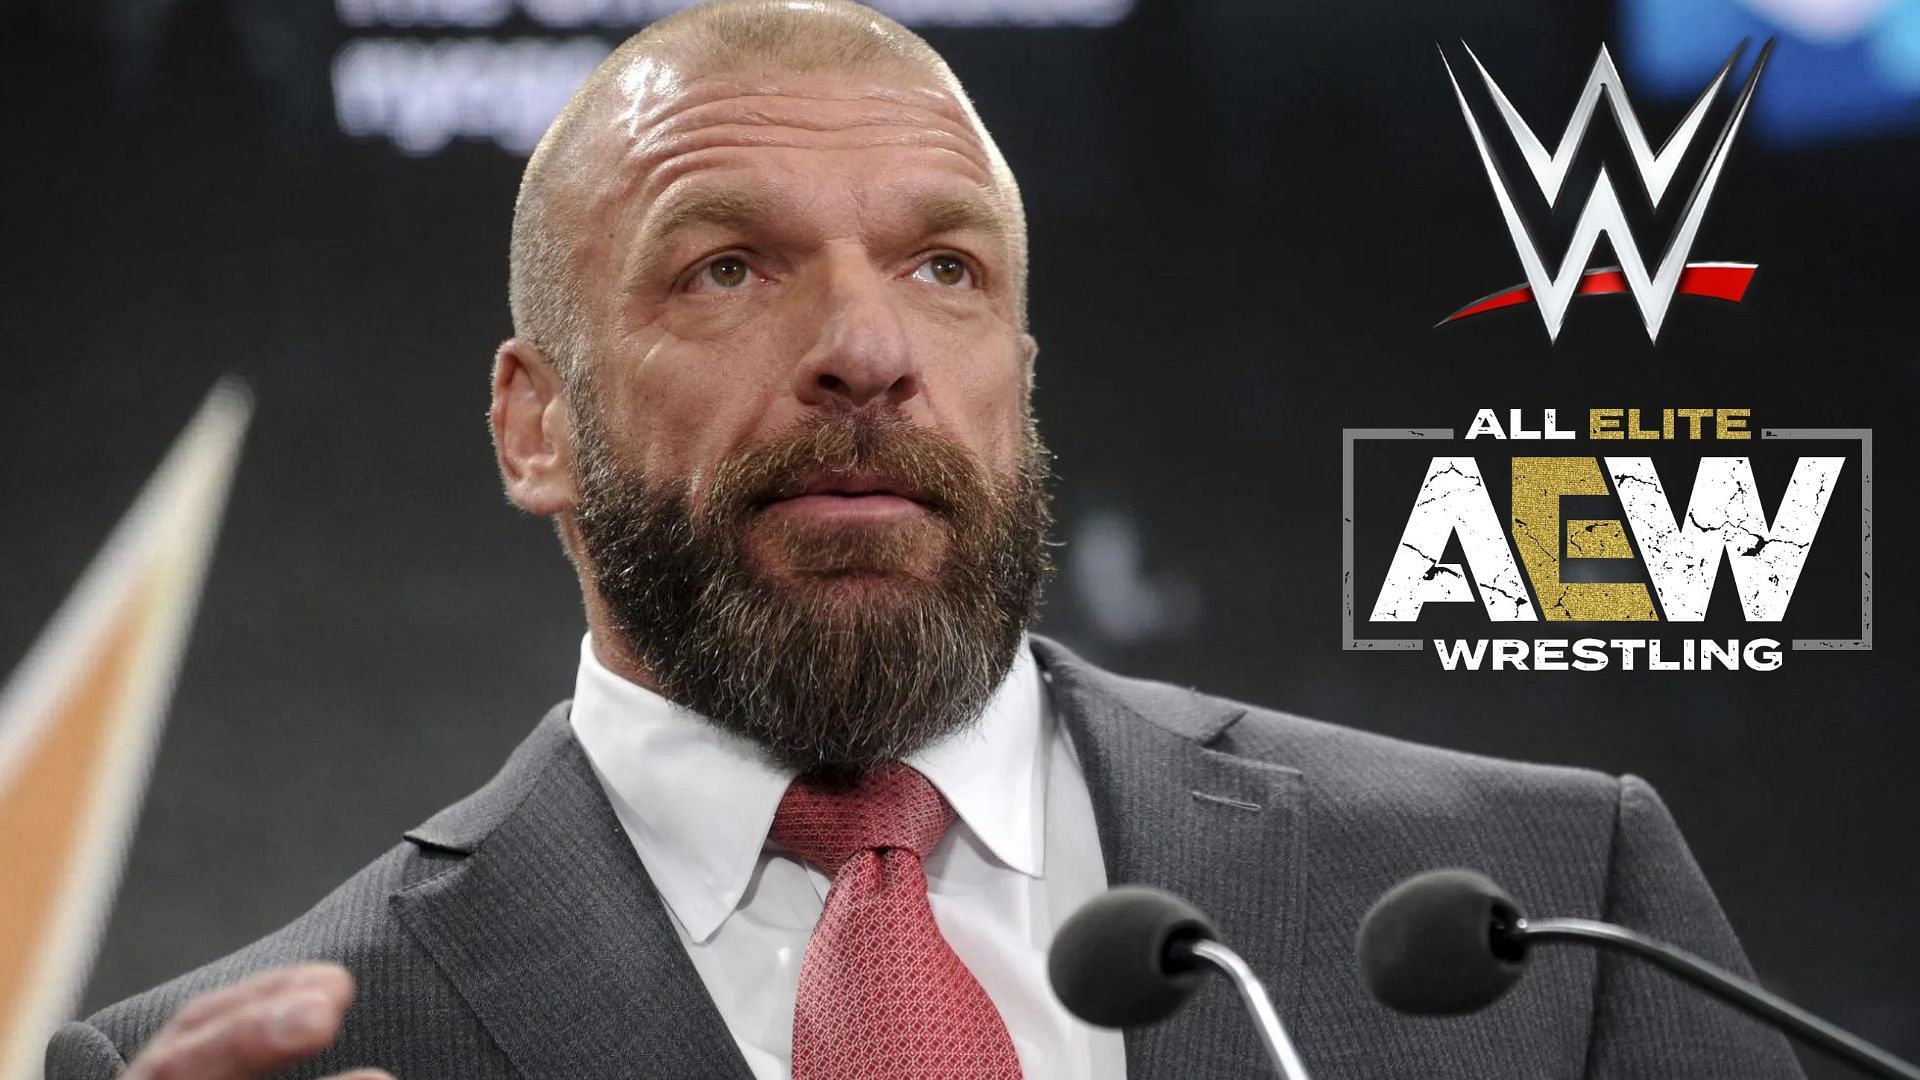 Fans want Triple H to sign an AEW star